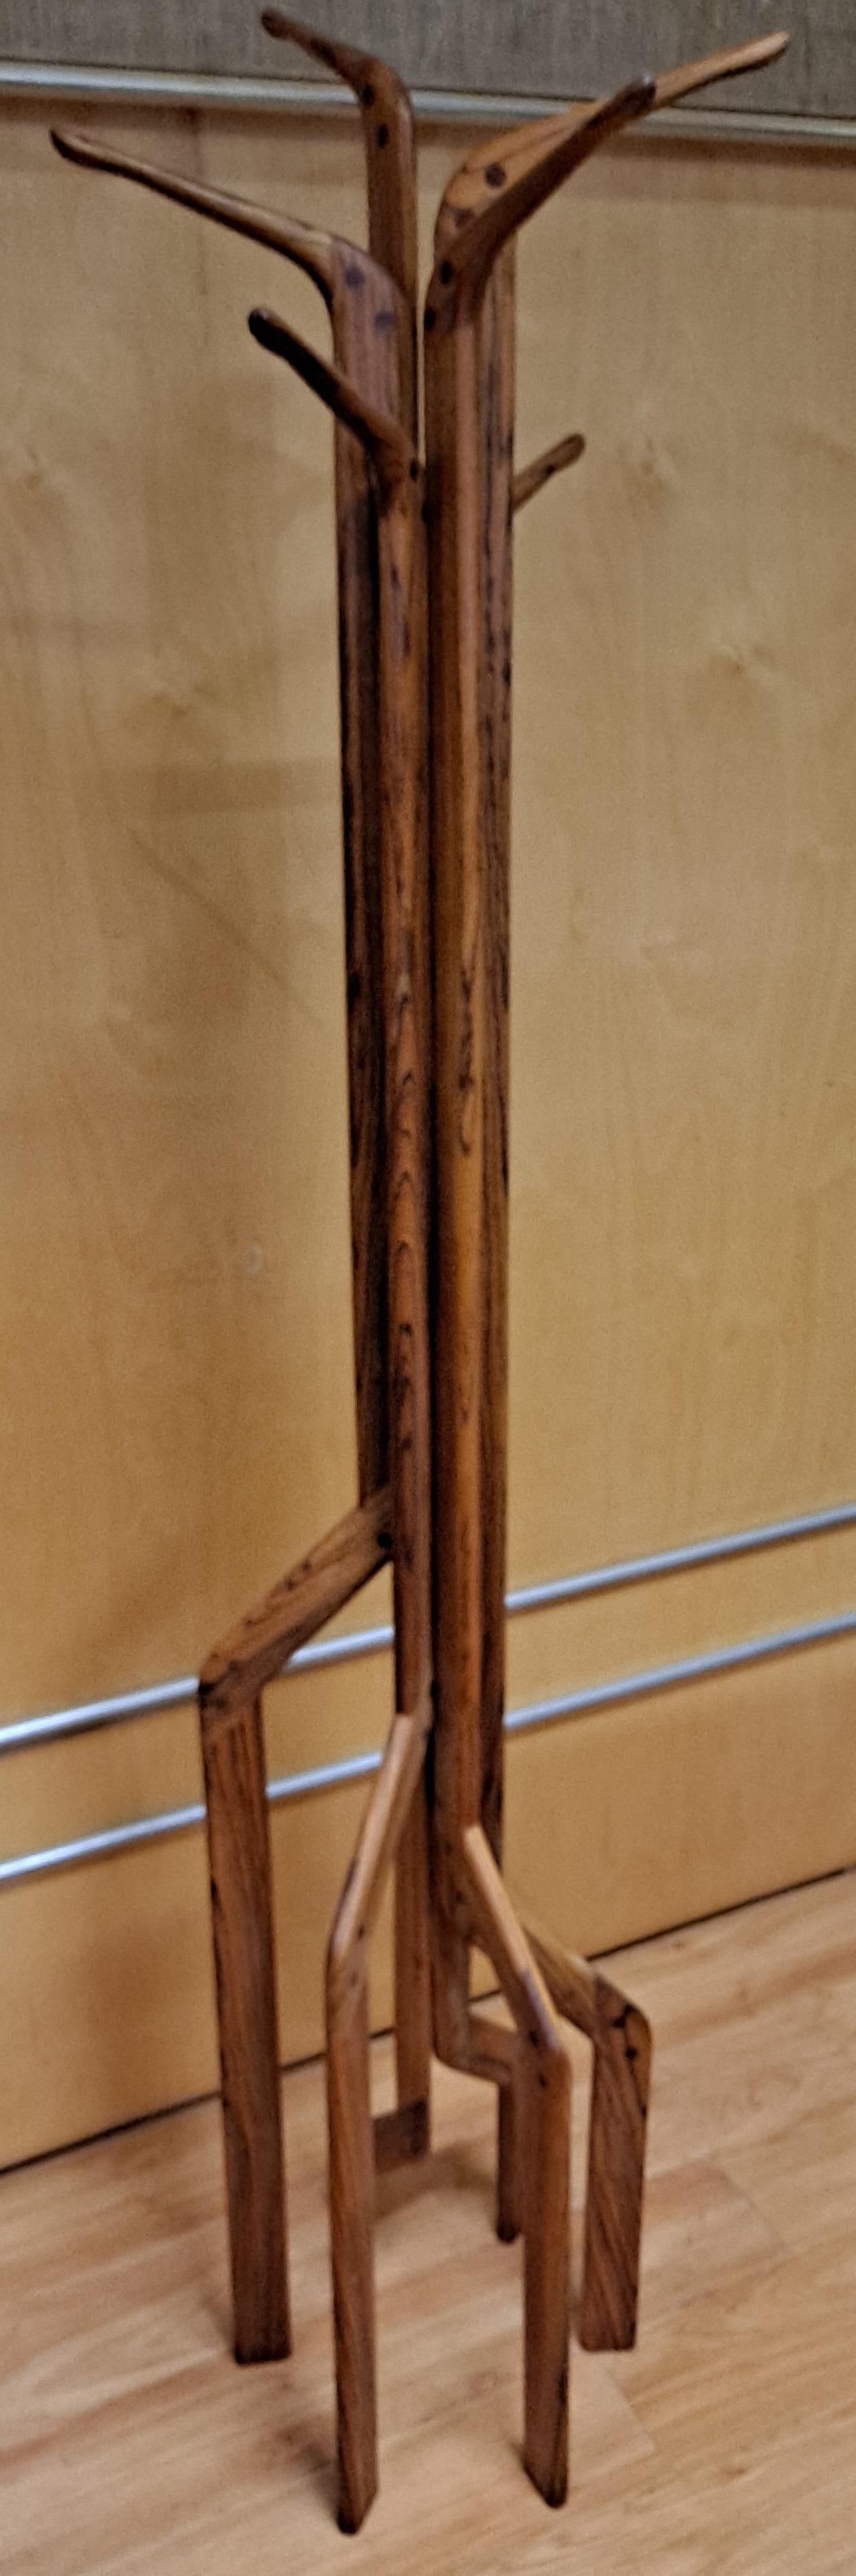 Charles B Cobo Coat Stand. 1976

The top of the coat stand was designed to simulate bird heads with wood inlay bearing as eyes.

Walnut wood 

Signature and date on leg

72.25